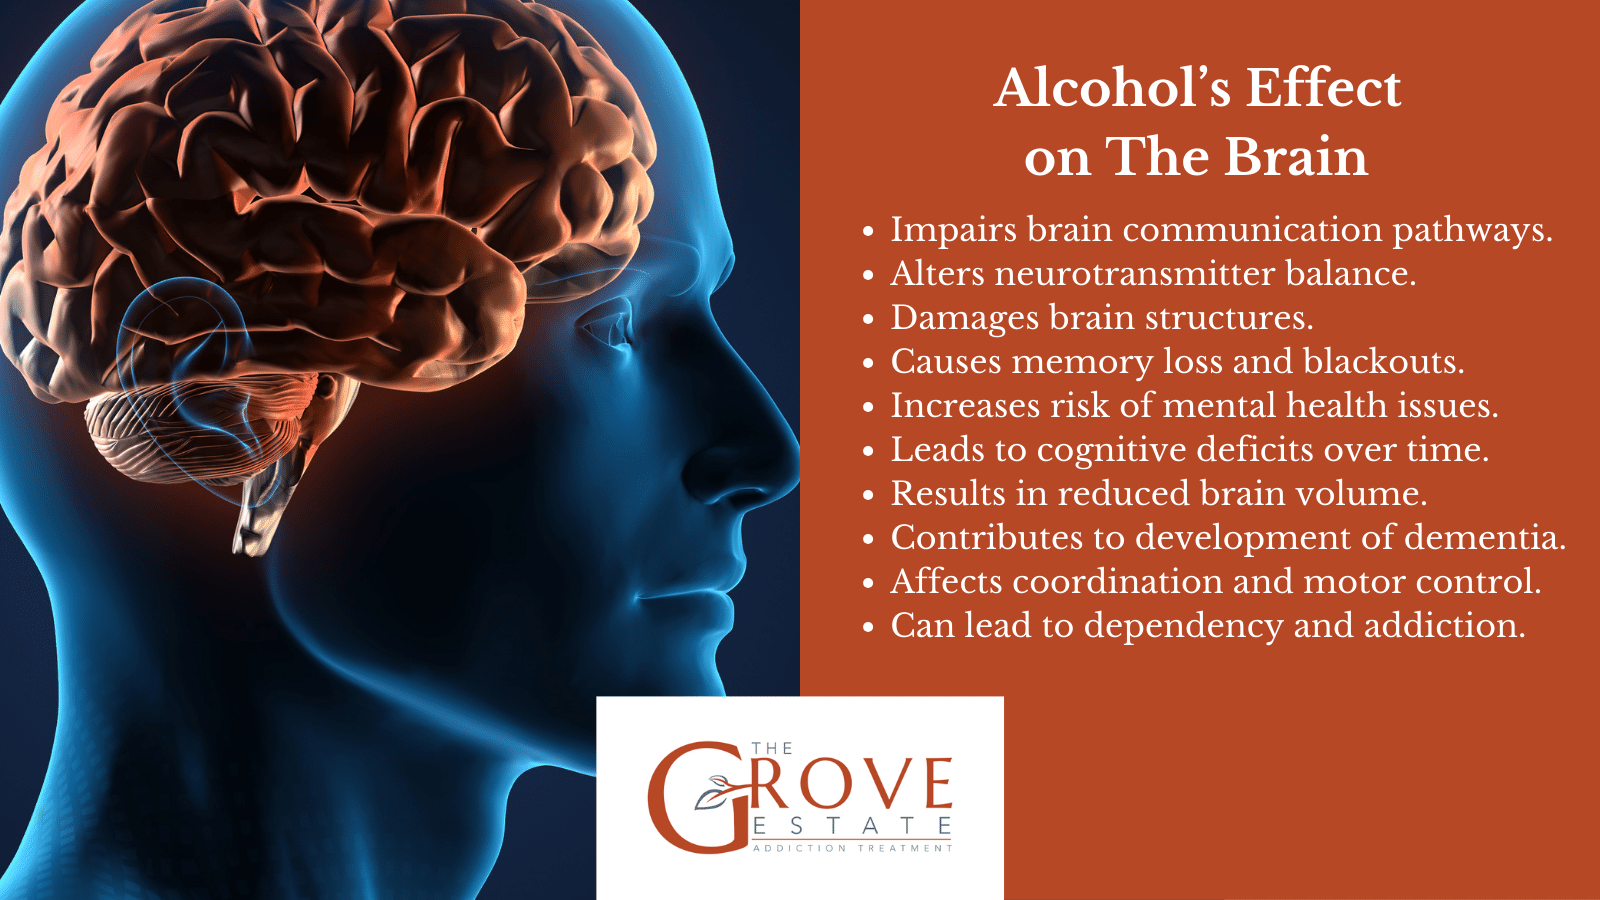 Alcohol's Effect on the Brain